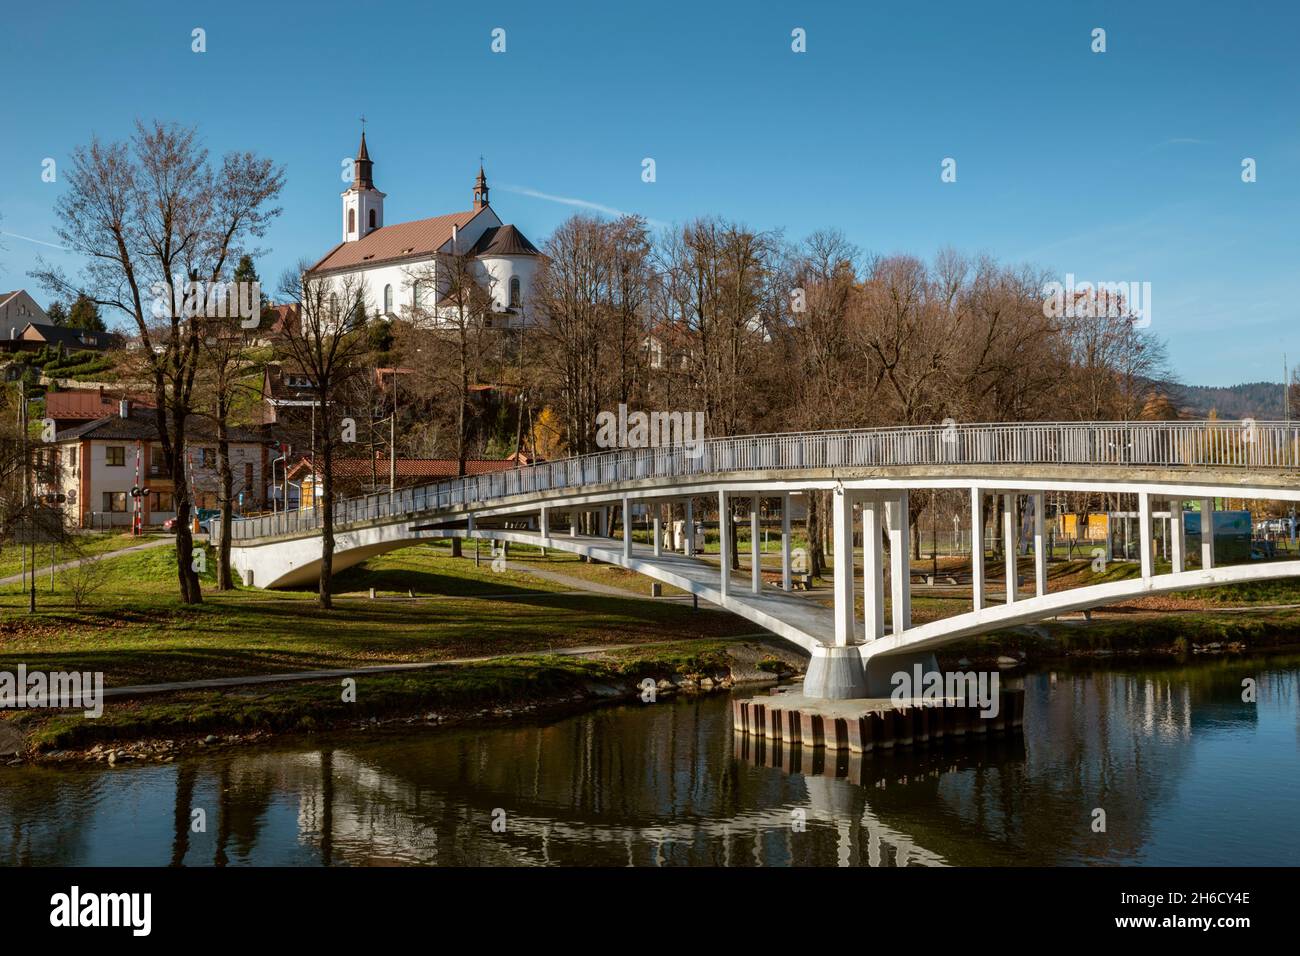 Church in Piwniczna with Poprad river and bridge in the foreground Stock Photo